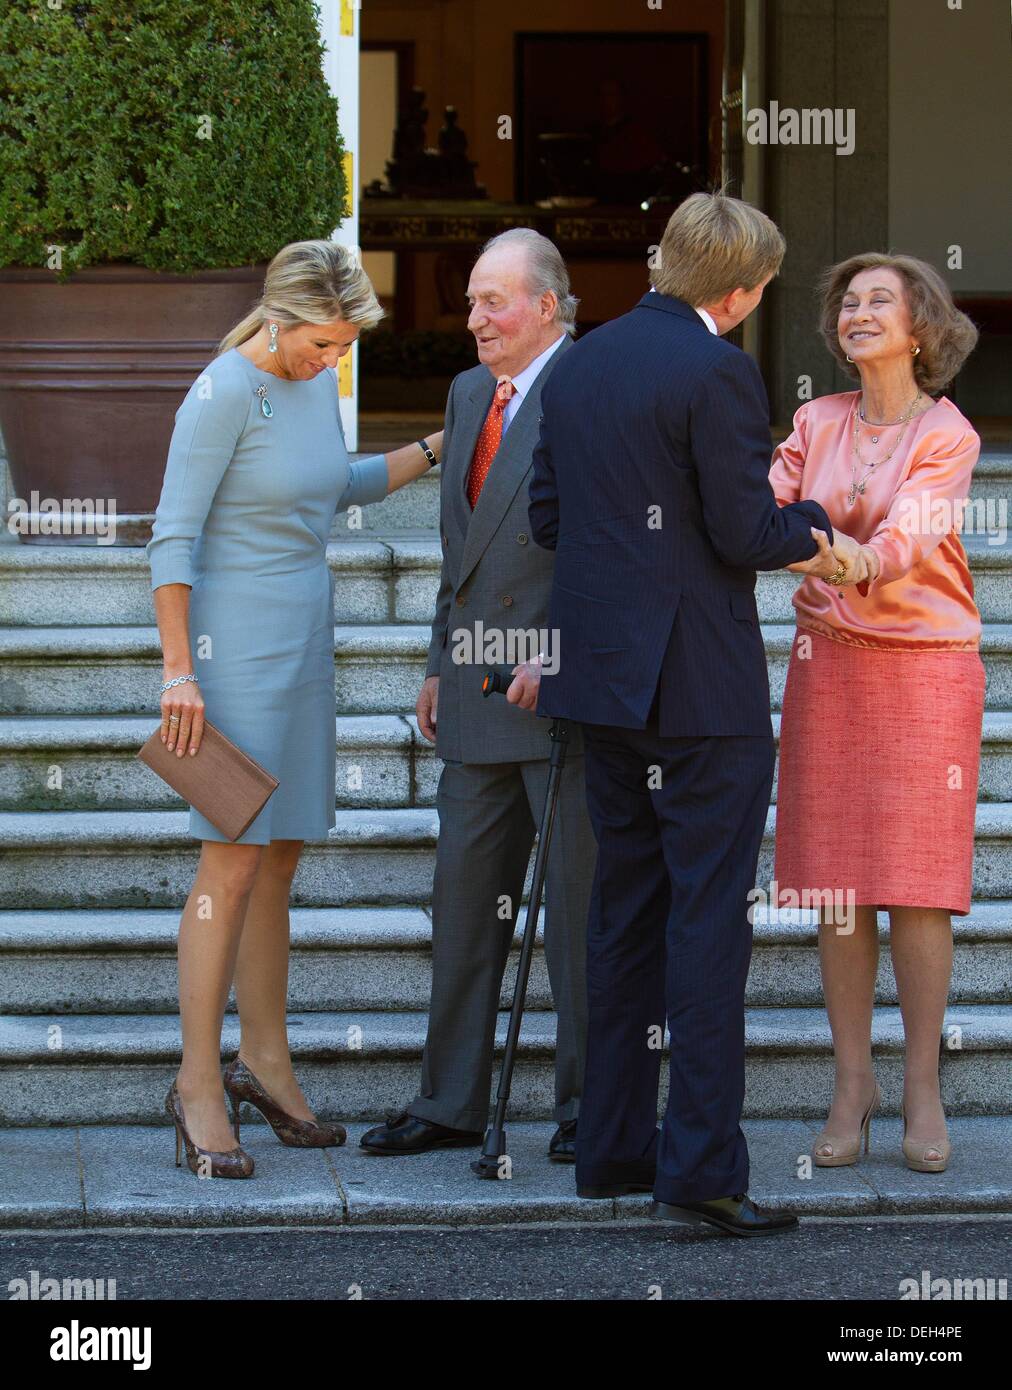 Madrid, Spain. 18th Sep, 2013. Spanish King Juan Carlos I (2-L) and Queen Sofia (R) welcome Dutch King Willem-Alexander (2-R) and Queen Maxima before a luncheon at Zarzuela Palace in Madrid, Spain, 18 September 2013. The Dutch Royal couple have arrived to Madrid for a one-day official visit, their first to the country since the King's enthronement. Photo: RPE/ Albert Philip van der Werf - -/dpa/Alamy Live News Stock Photo